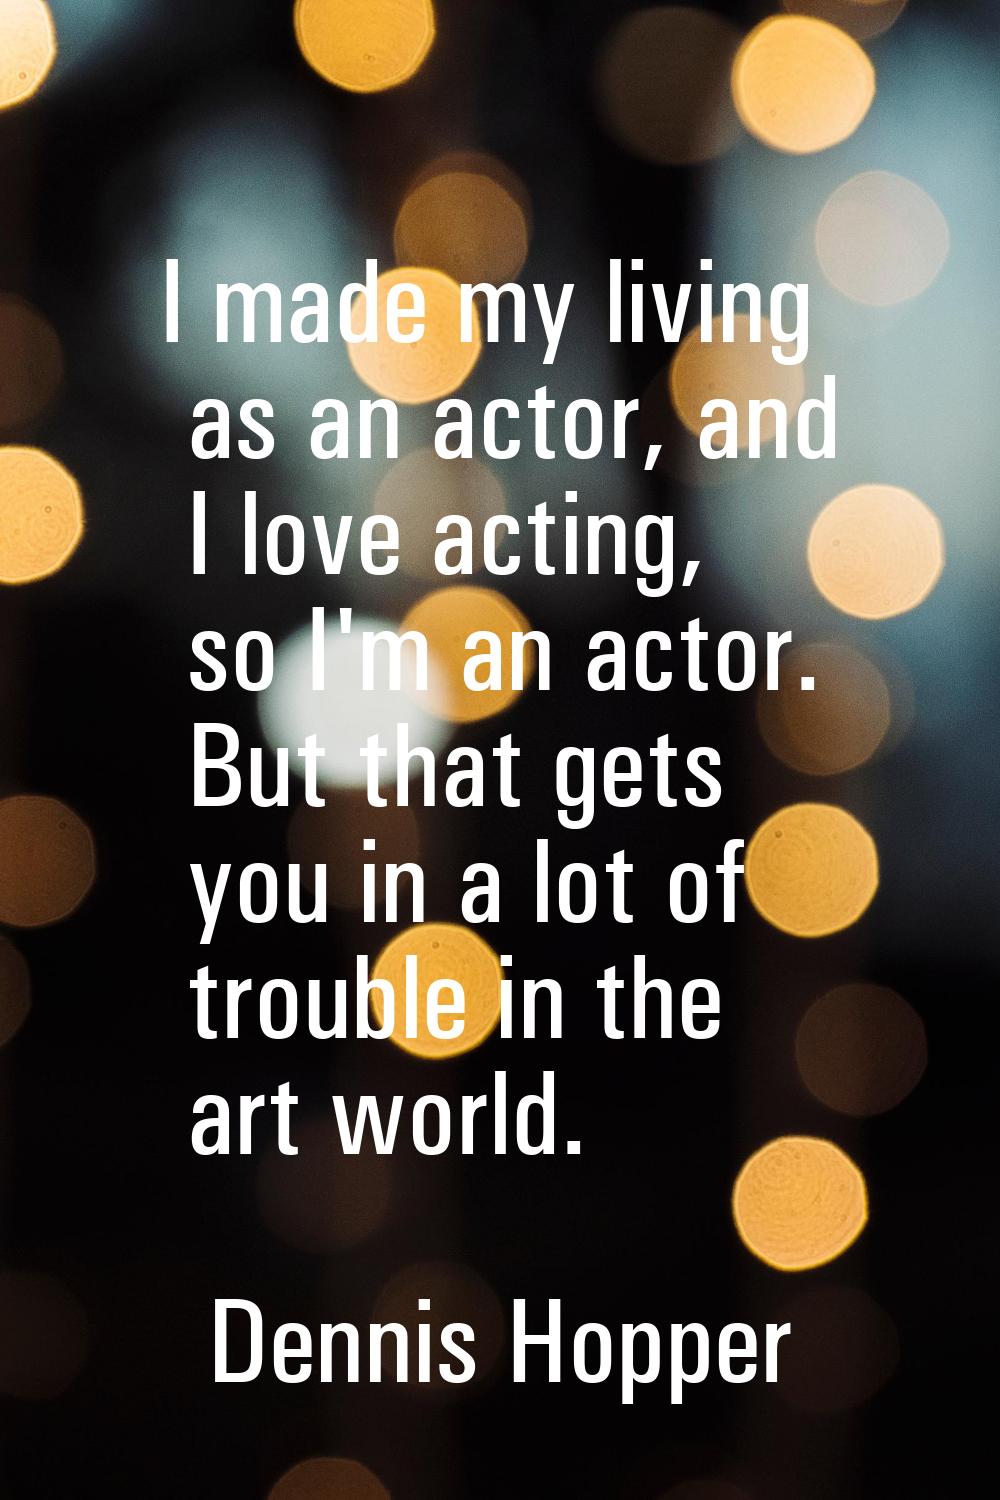 I made my living as an actor, and I love acting, so I'm an actor. But that gets you in a lot of tro